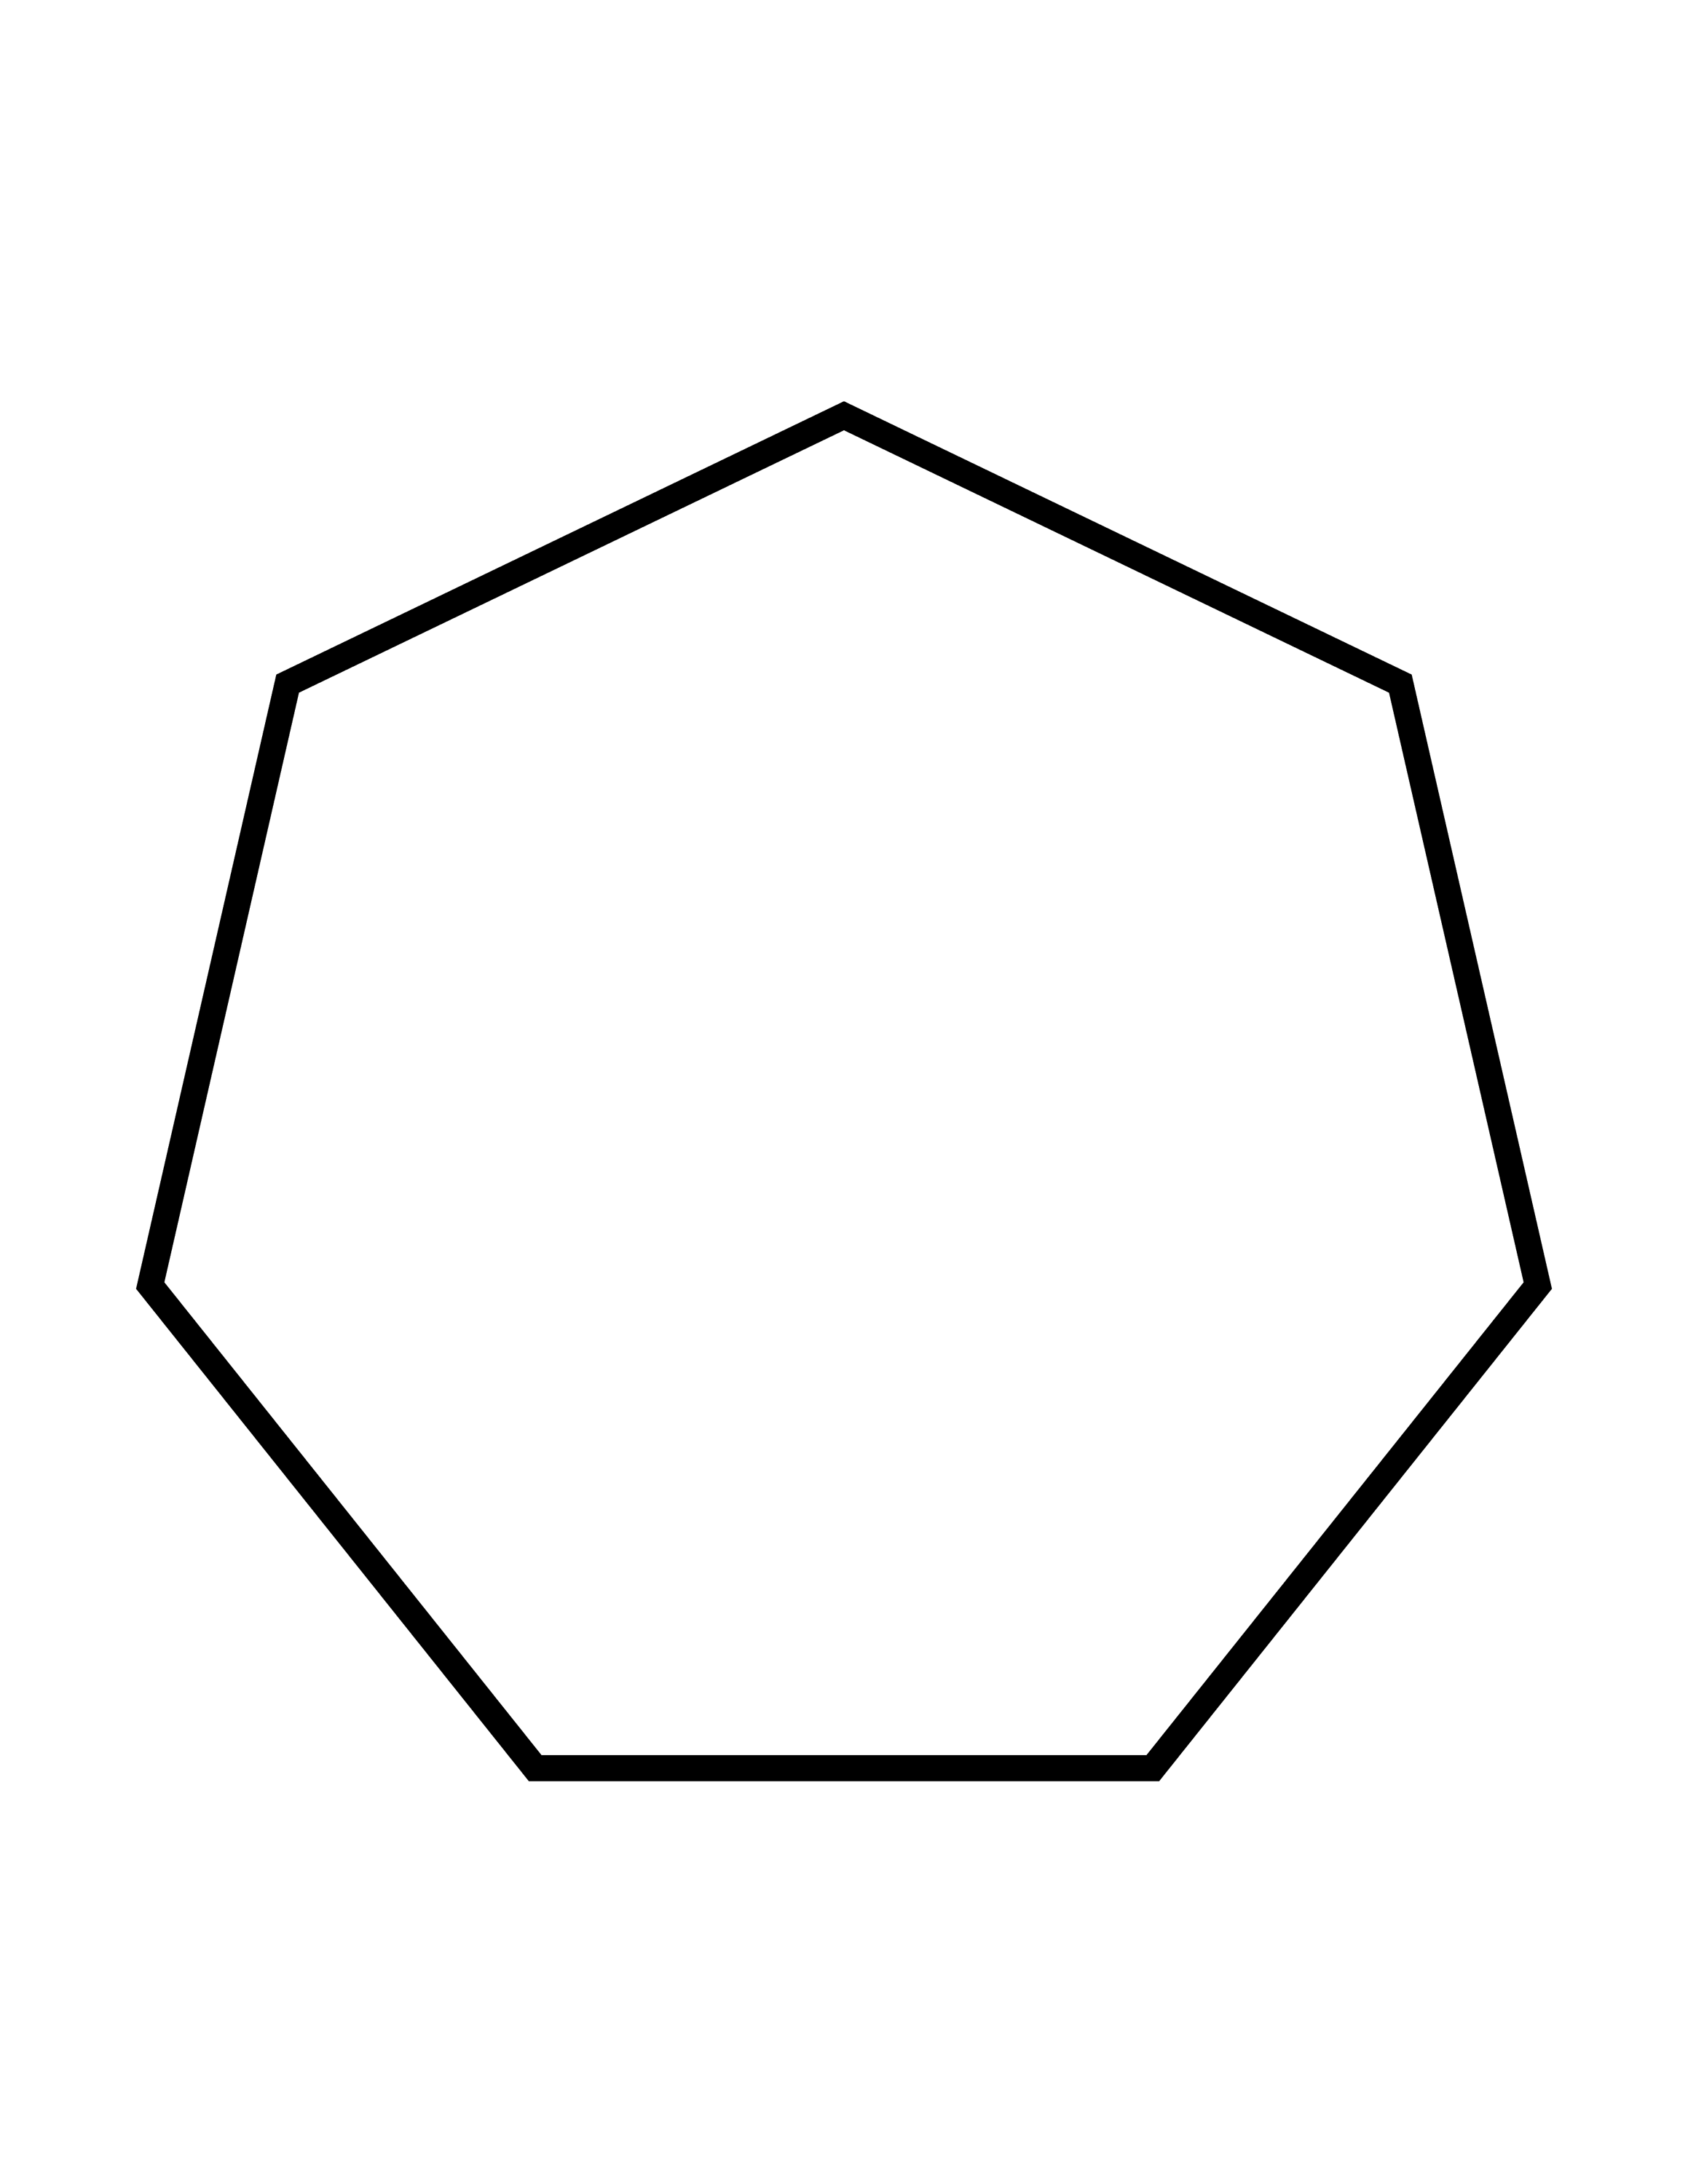 Flashcard Of A Polygon With Seven Equal Sides   Clipart Etc